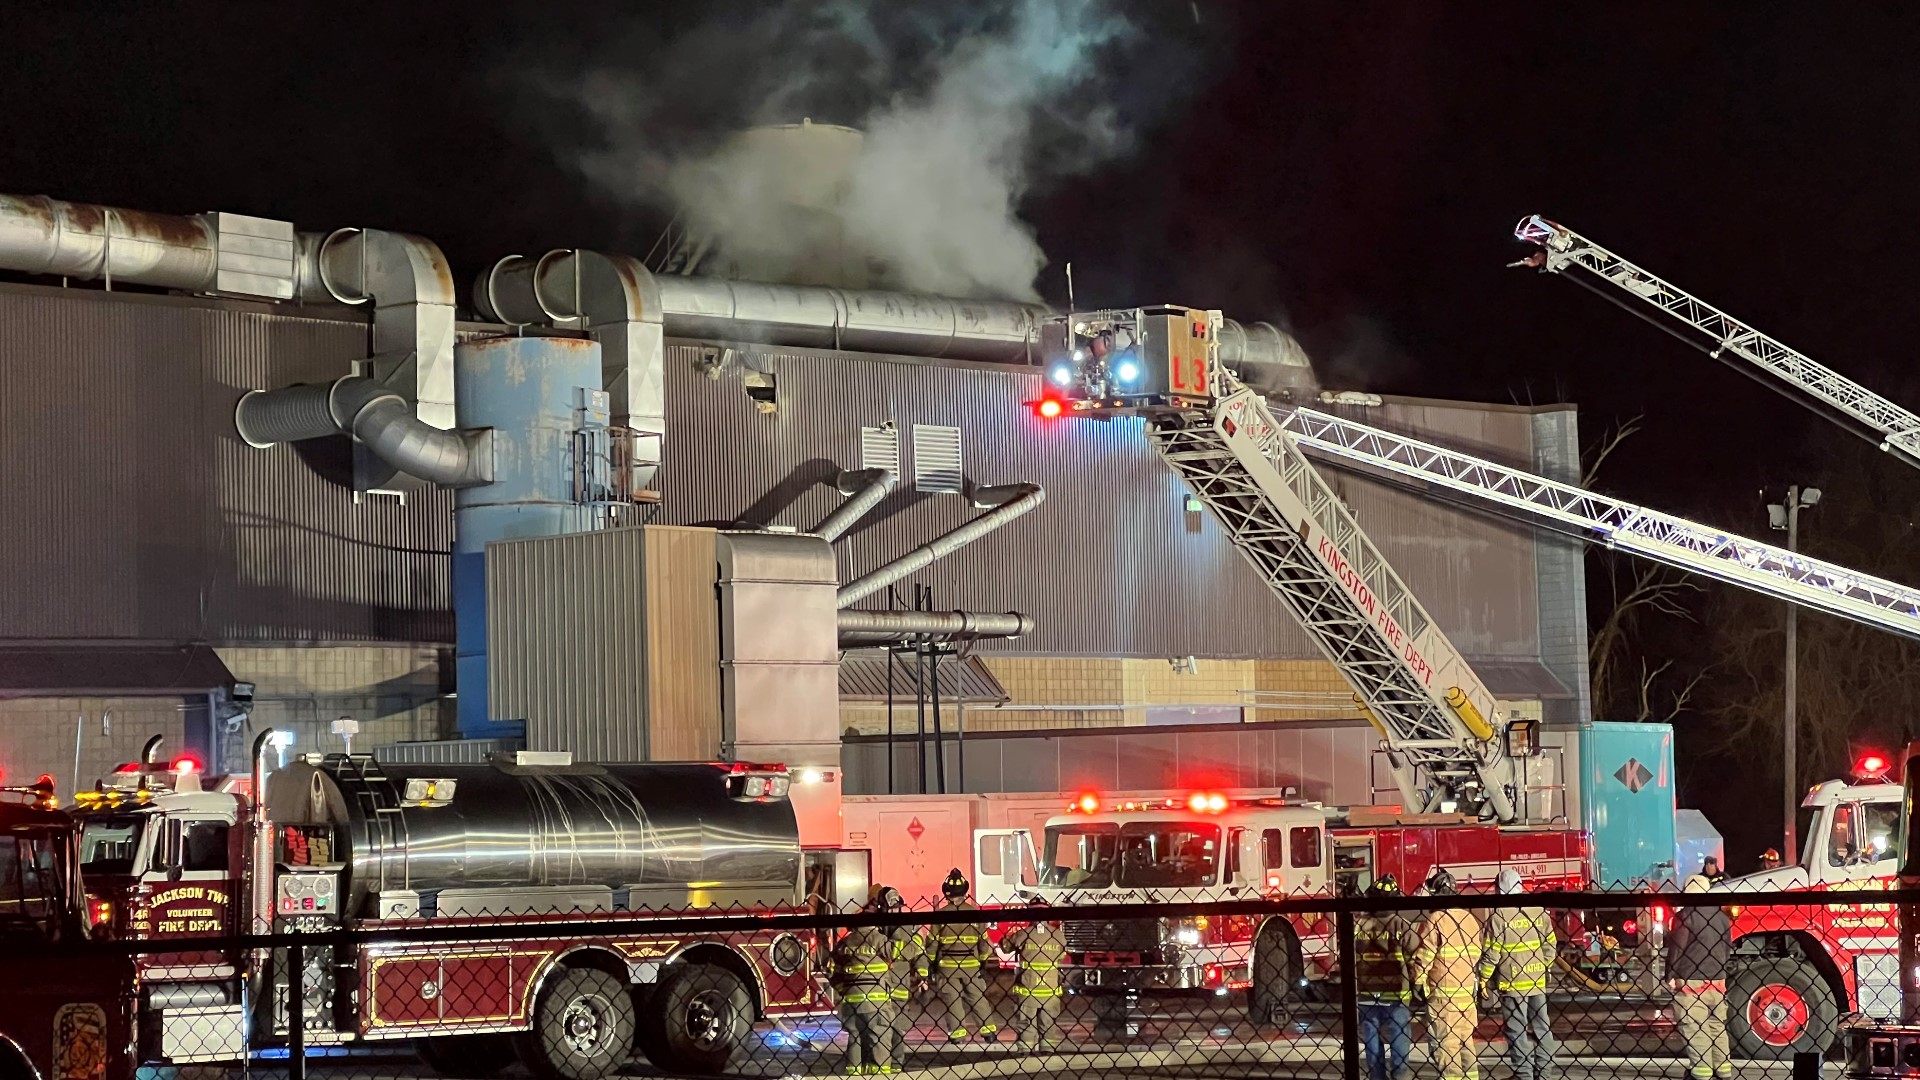 The fire started just after 6 p.m. Friday night at Offset Paperback Manufacturers in Dallas.